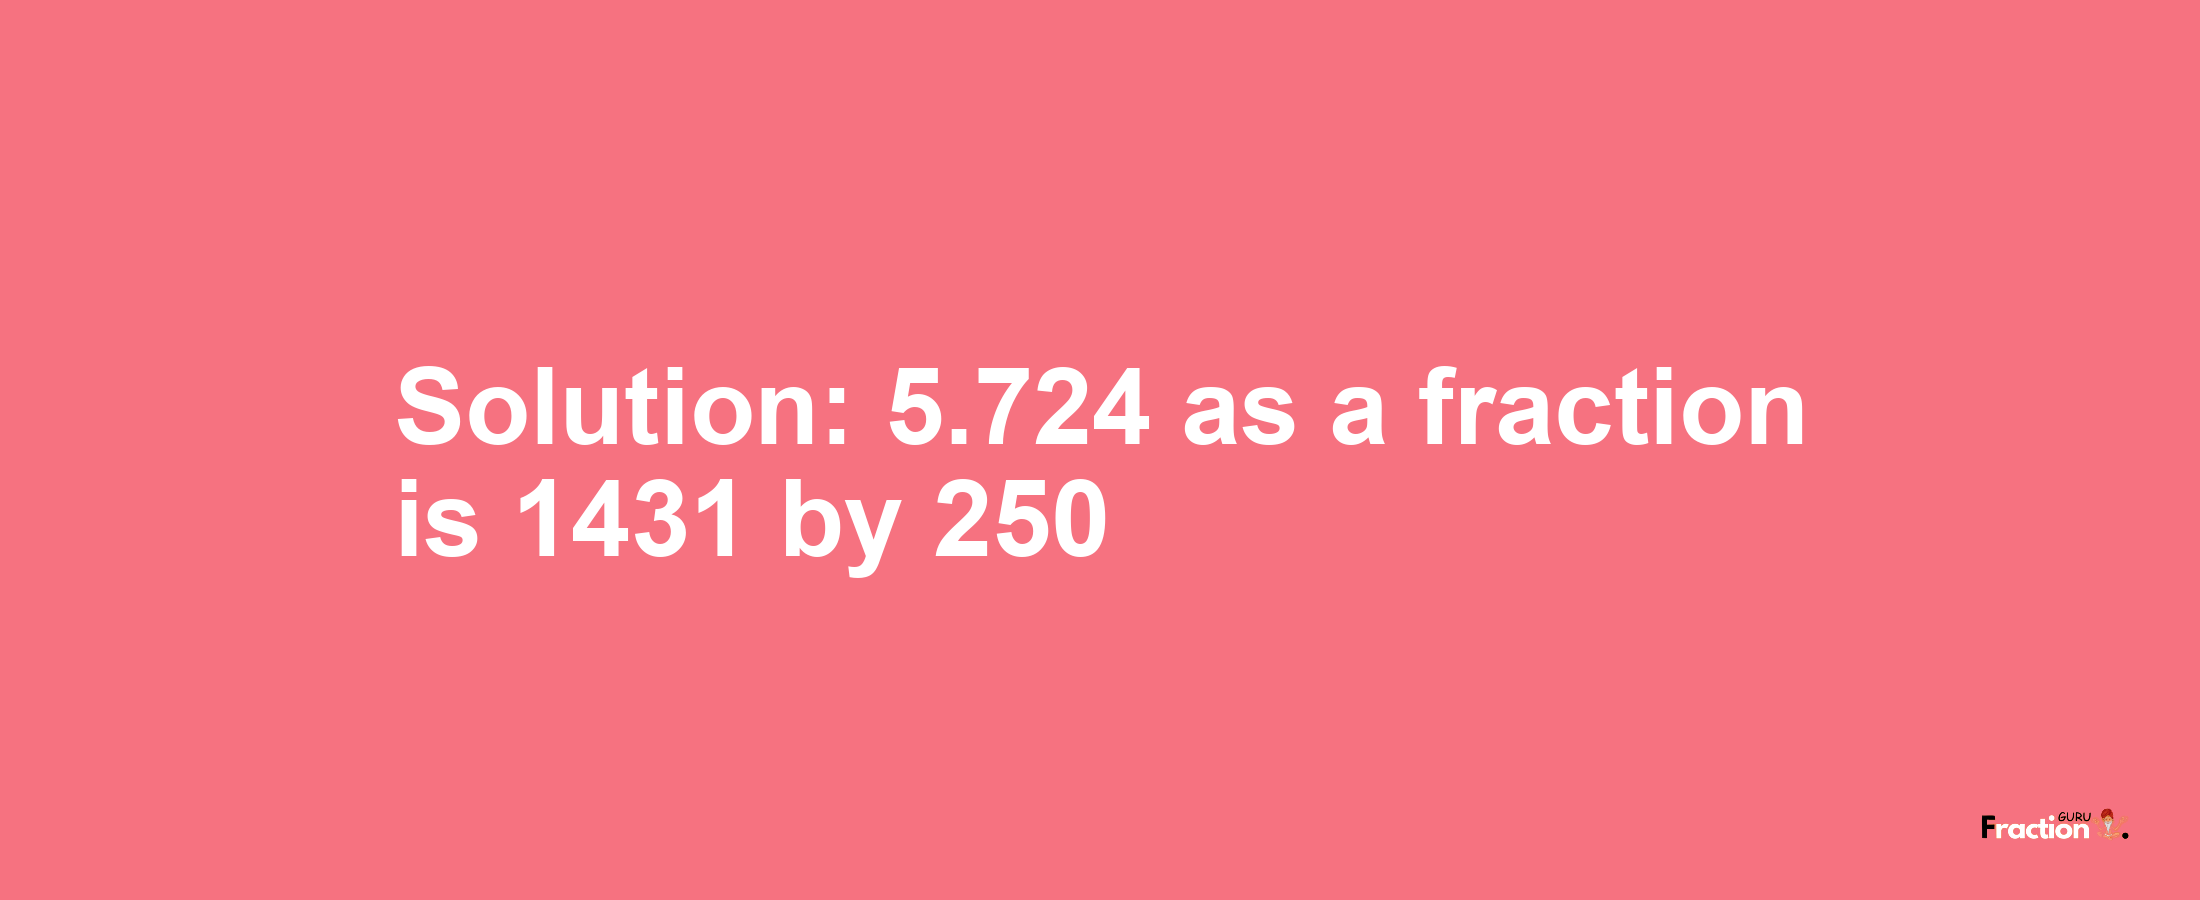 Solution:5.724 as a fraction is 1431/250